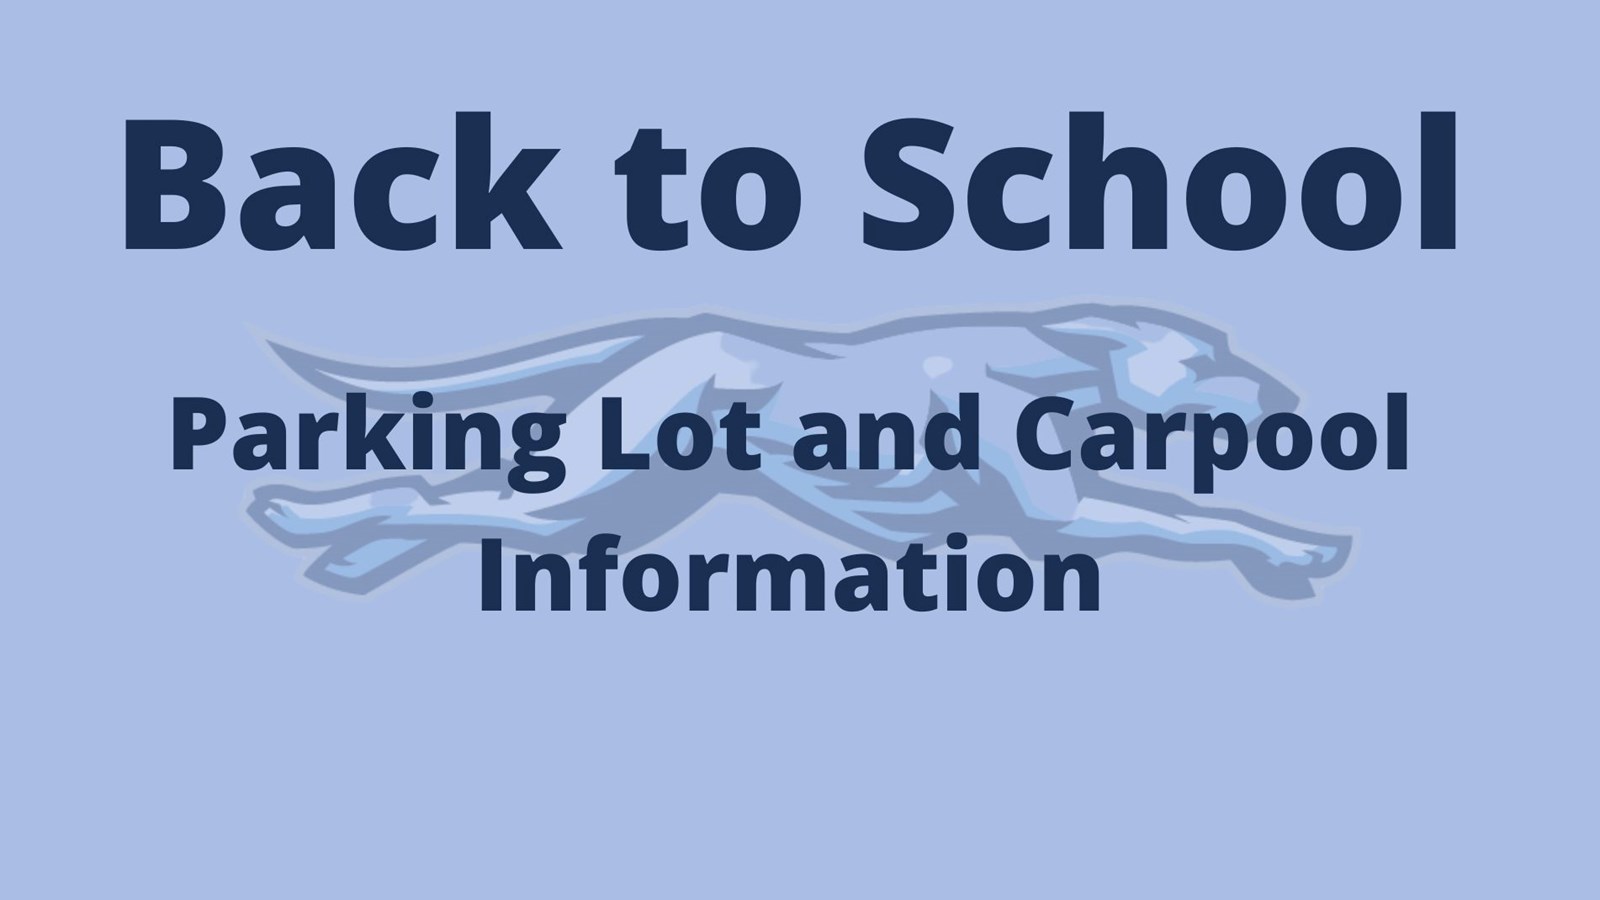 Pope Parking Lot and Carpool Information